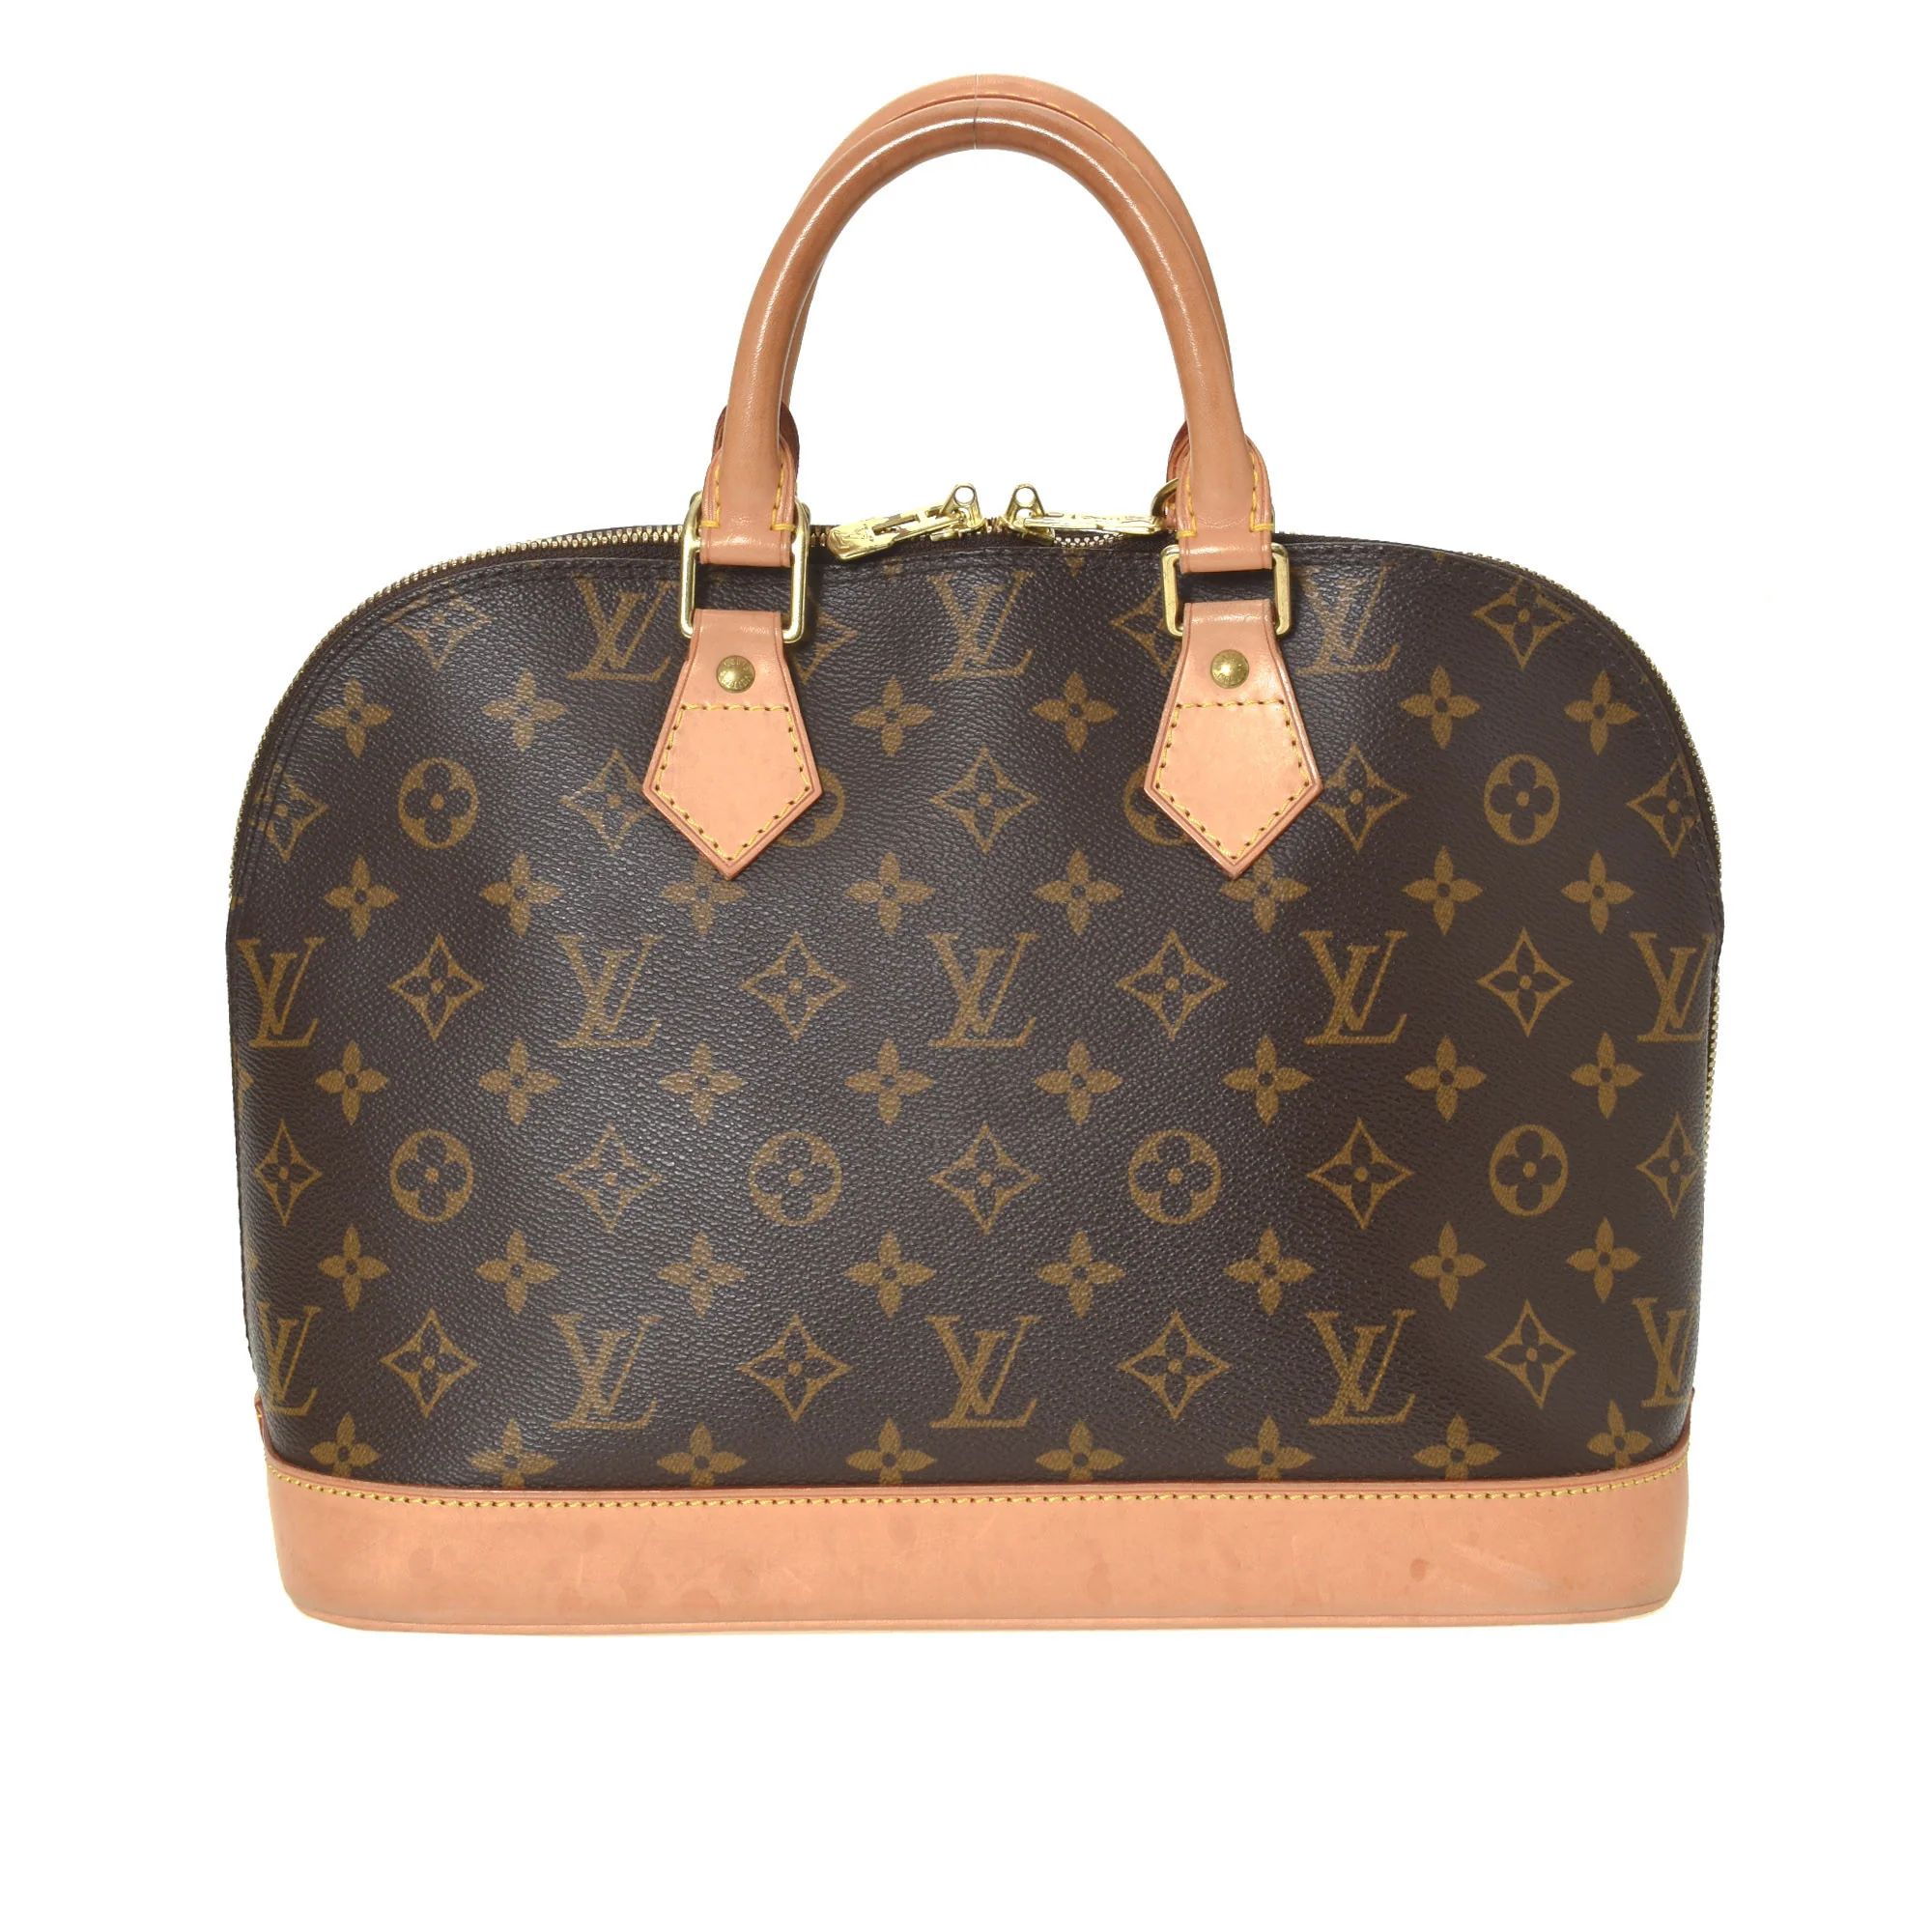 Louis Vuitton Alma Pm in Brown Lord & Taylor | Lord & Taylor